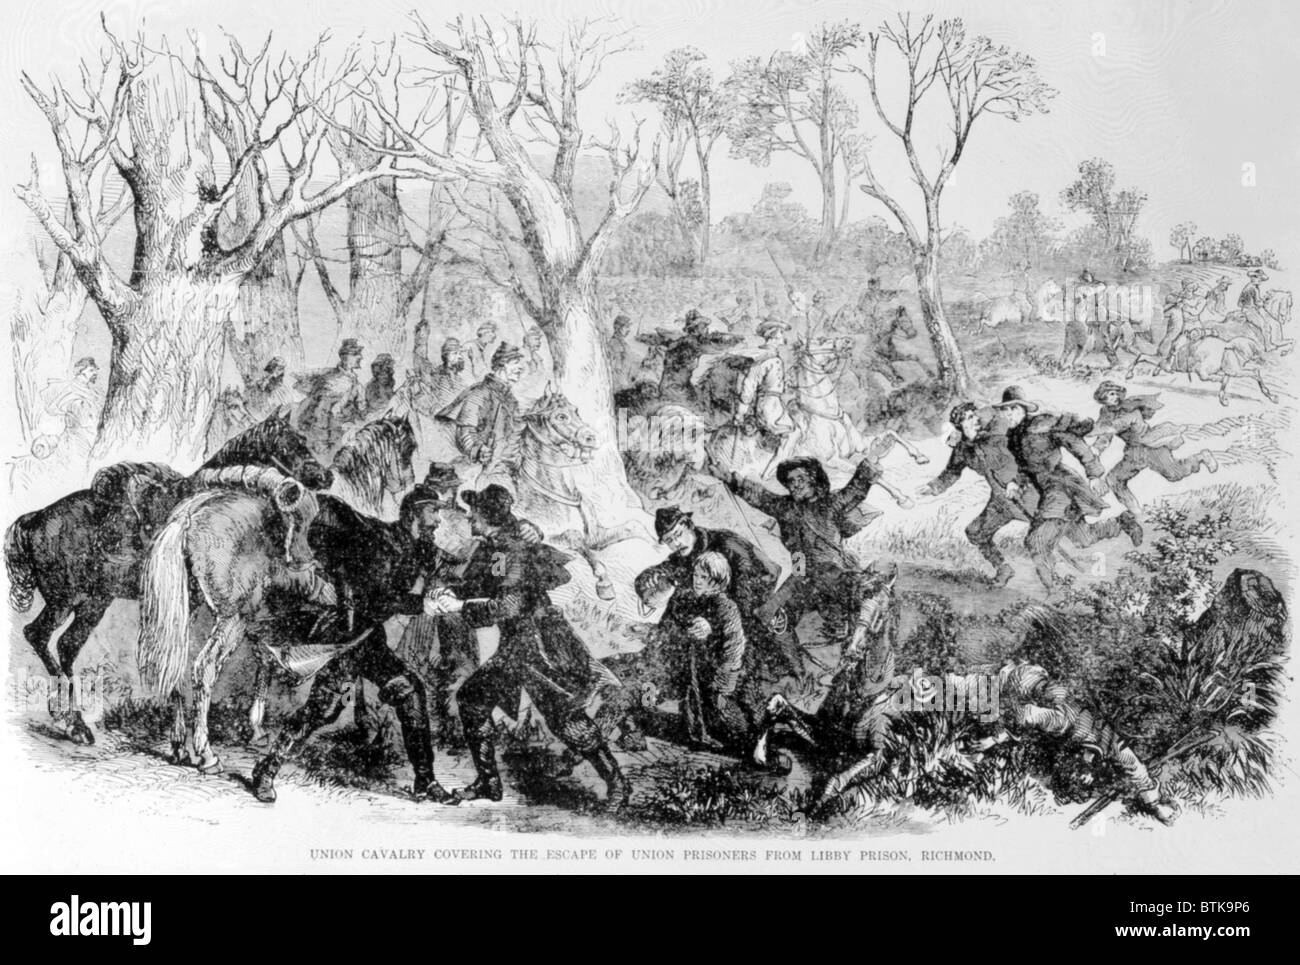 Union cavalry covering the escape of prisoners from Libby Prison in Richmond, Virginia Stock Photo